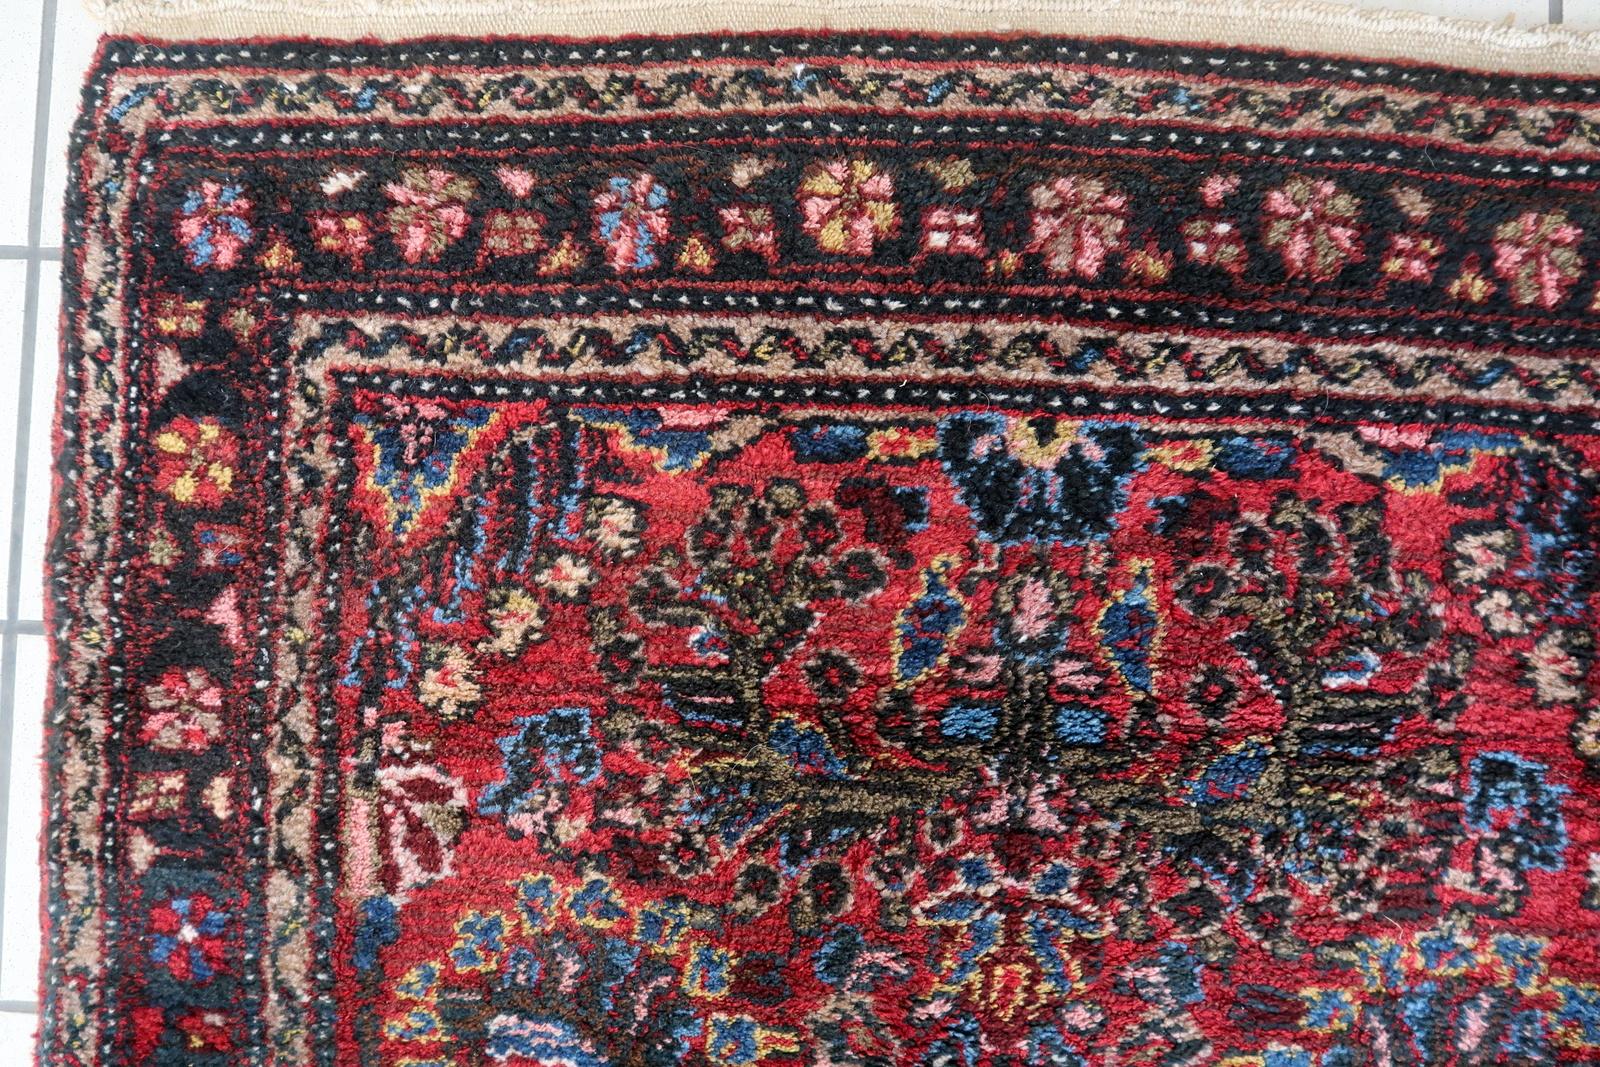 Introducing our exquisite Handmade Vintage Persian Style Sarouk Runner Rug, a captivating piece that harks back to the 1930s and embodies the timeless beauty of traditional Persian craftsmanship. In its original good condition, this rug exudes